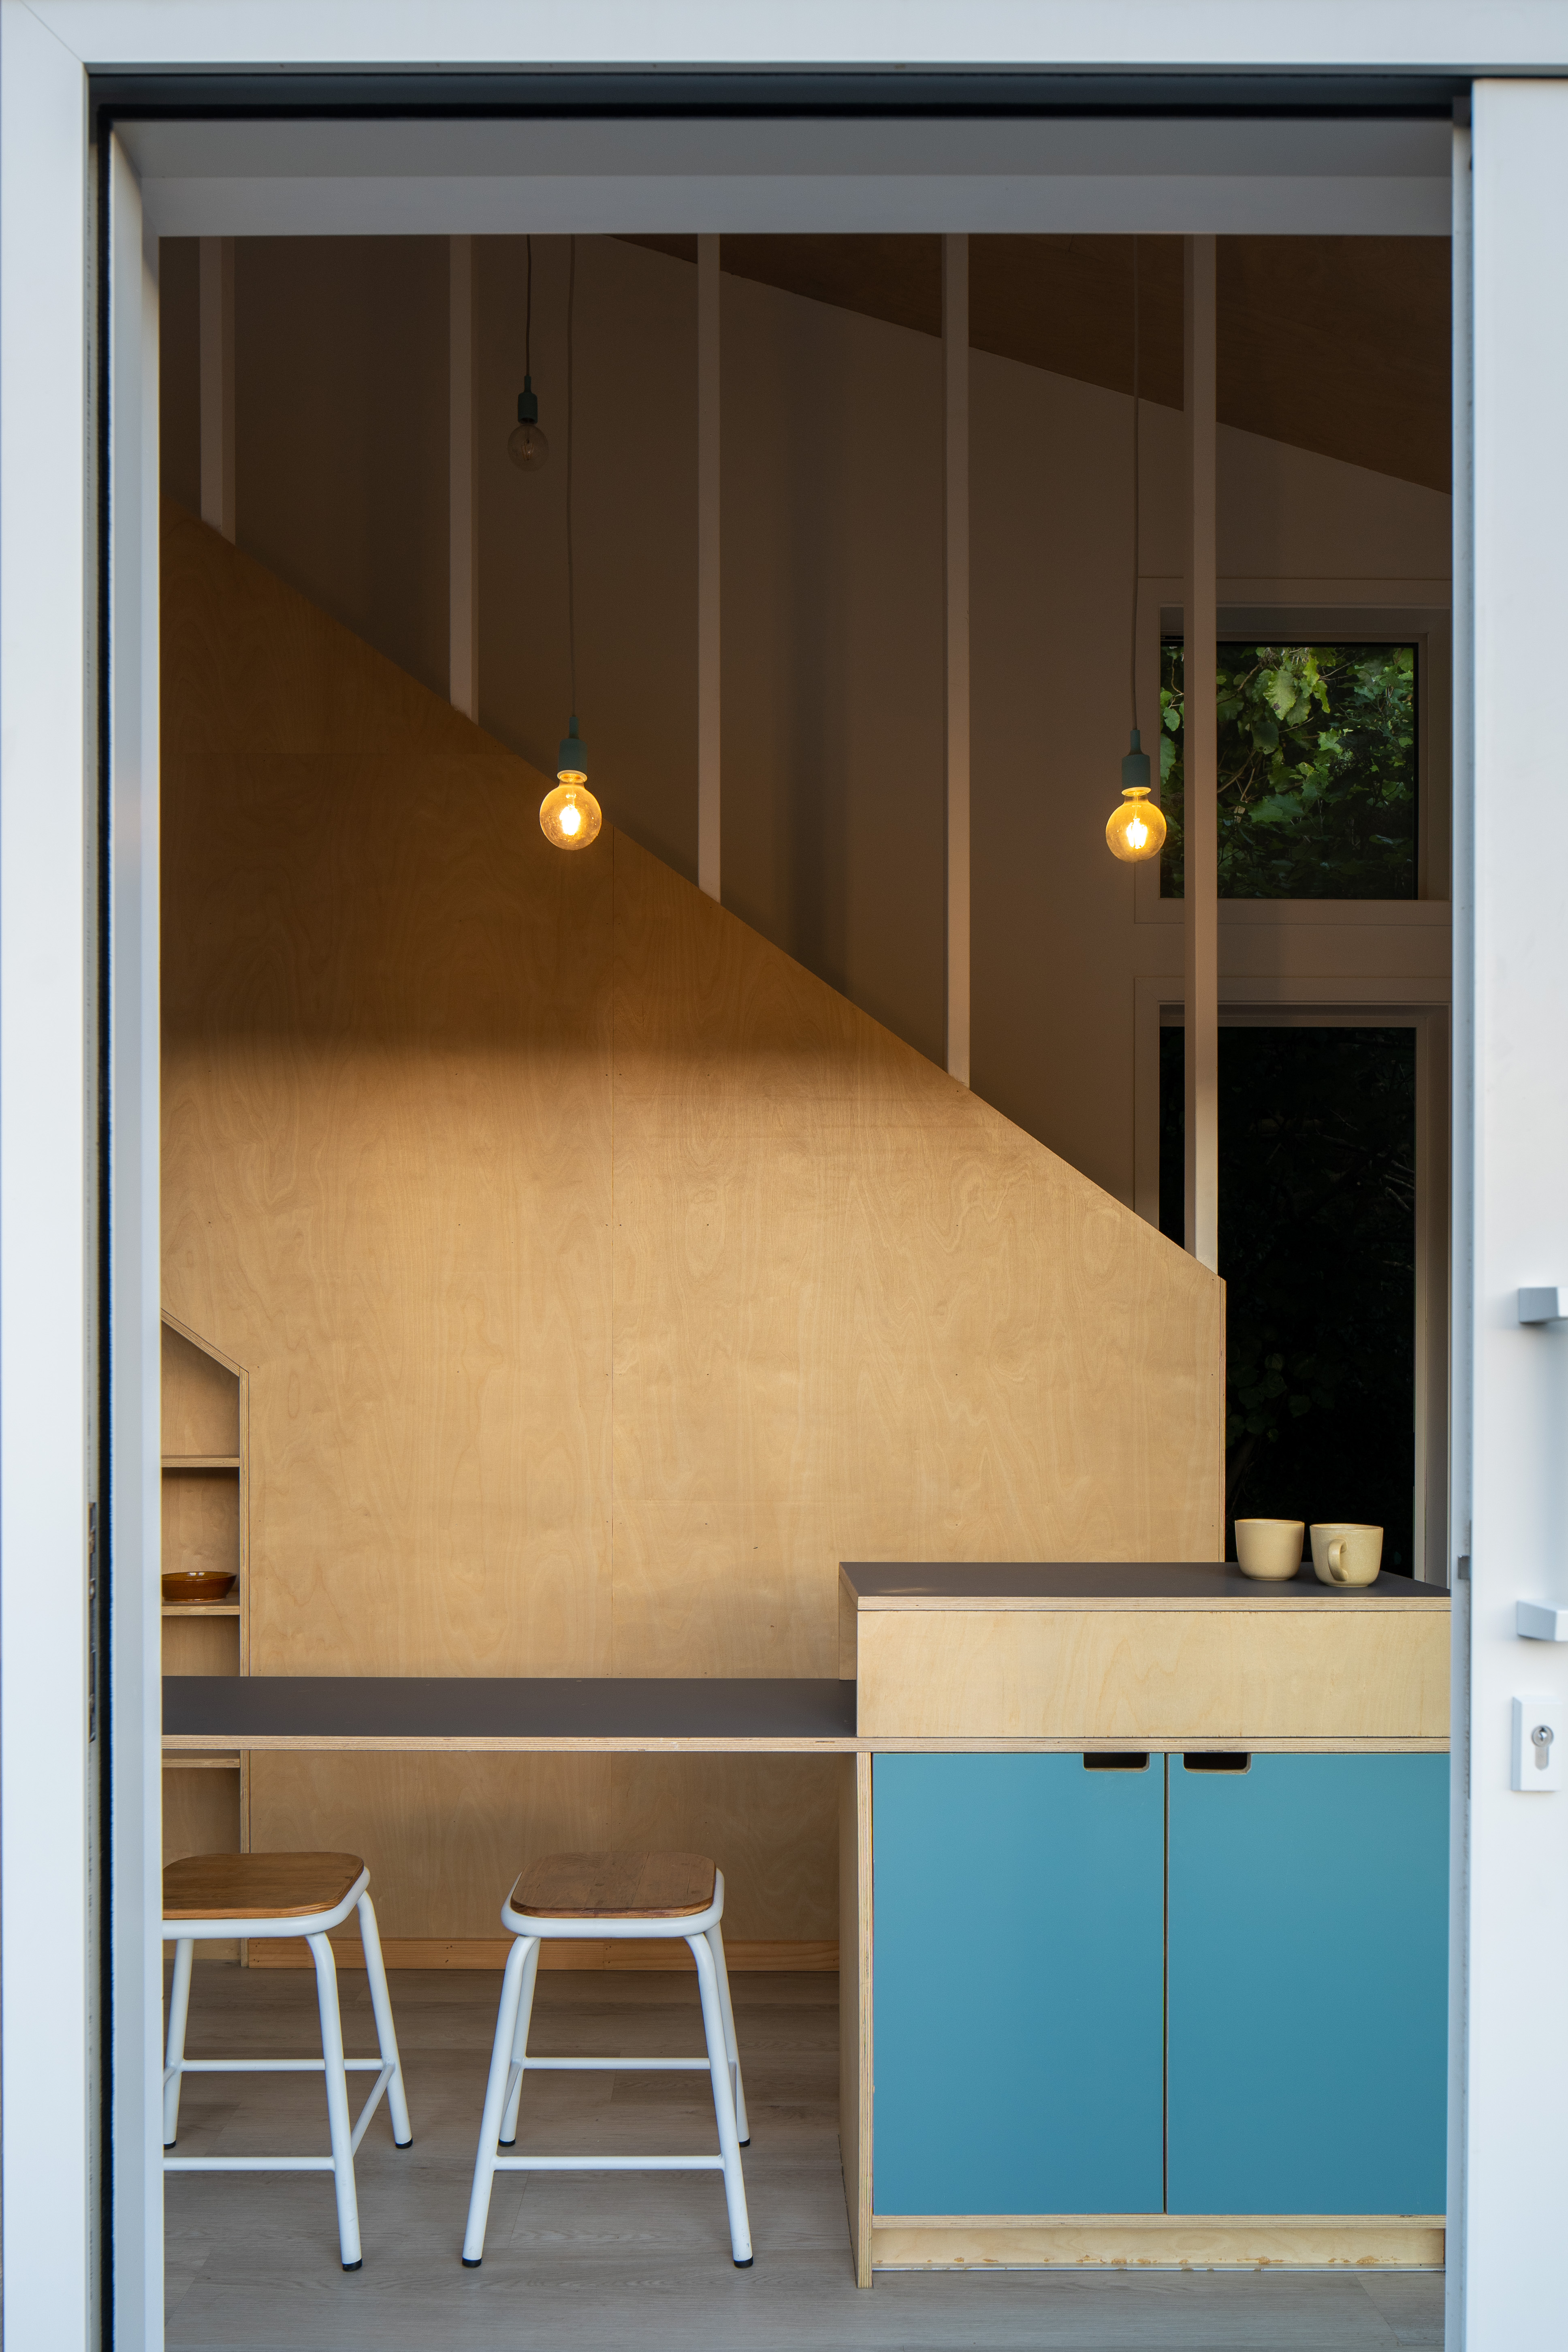 In the 2024 Small Home of the Year, the kitchen island doubles as a workspace; storage is incorporated under the stairs – each space versatile and multi-functional to make the most of the compact footprint. Image: Paul Brandon